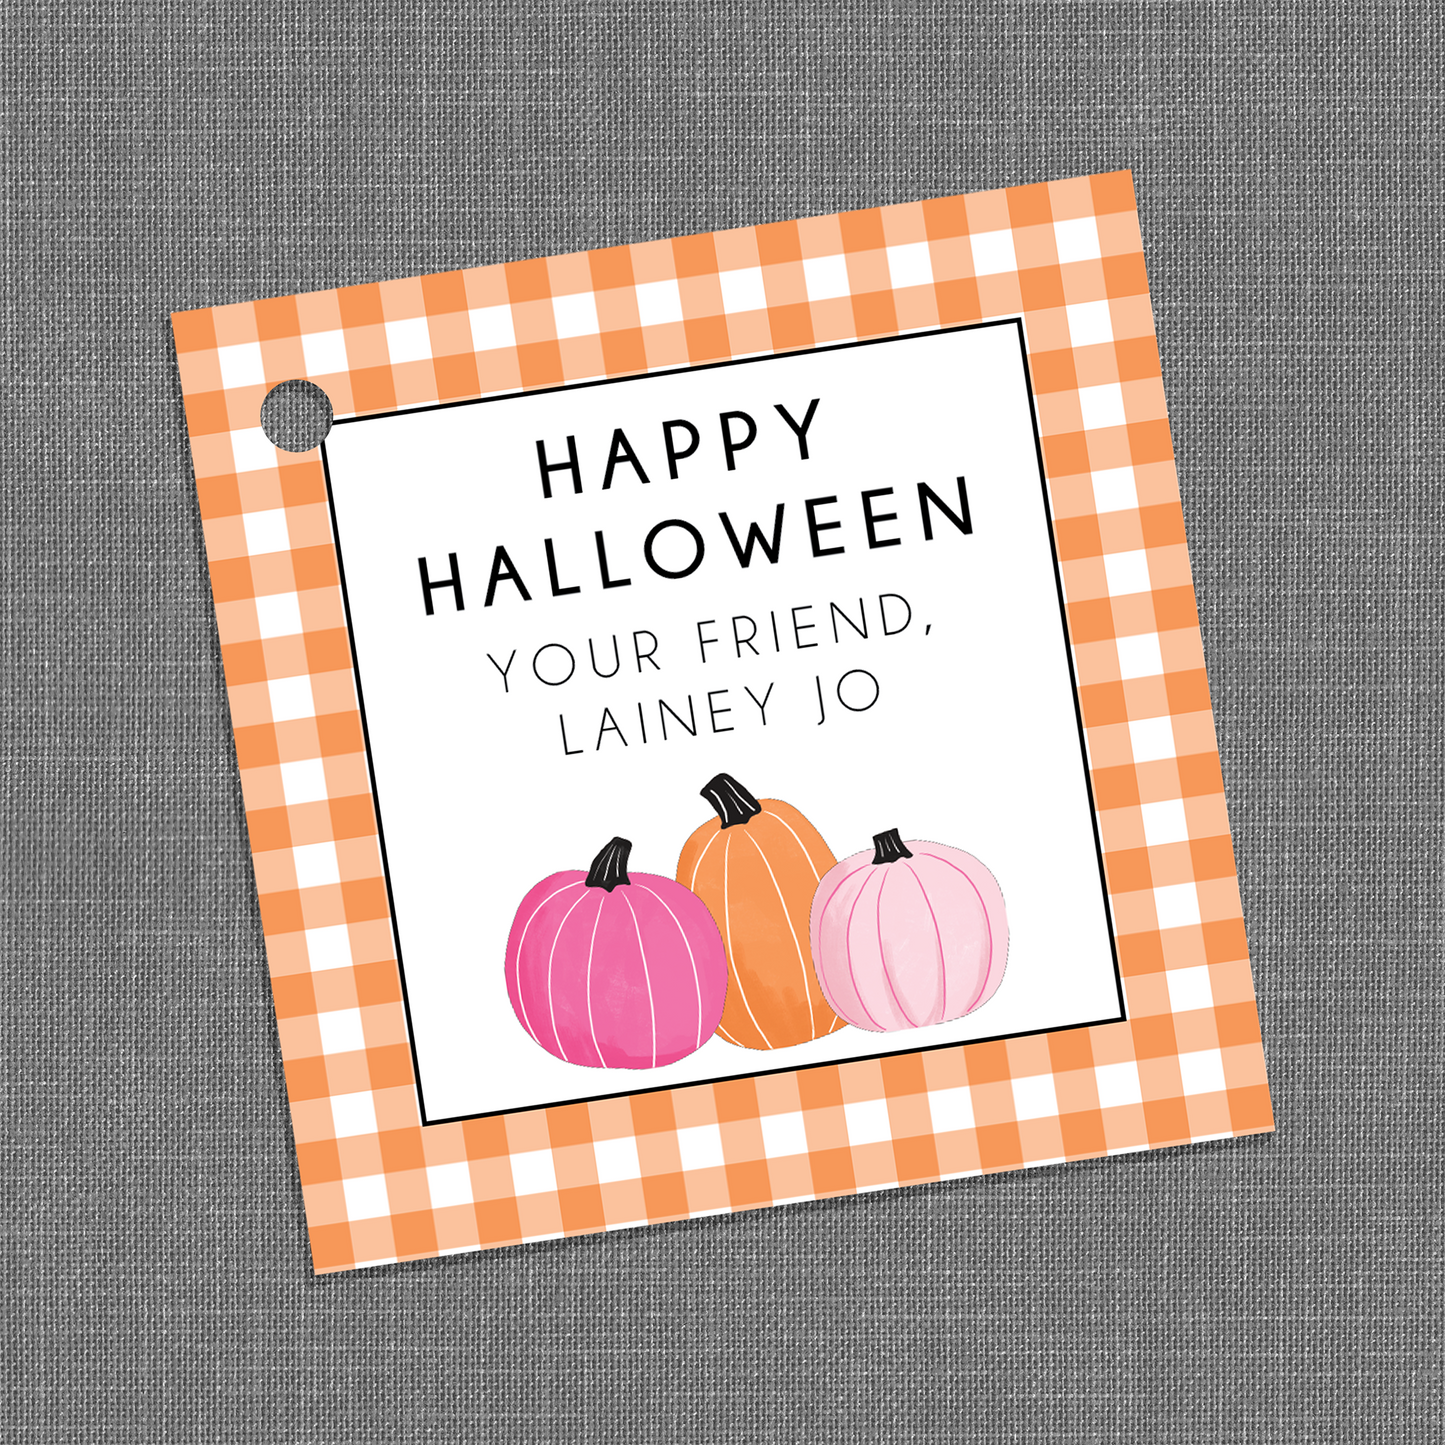 "Happy Halloween" Orange Gingham Party Gift Tags